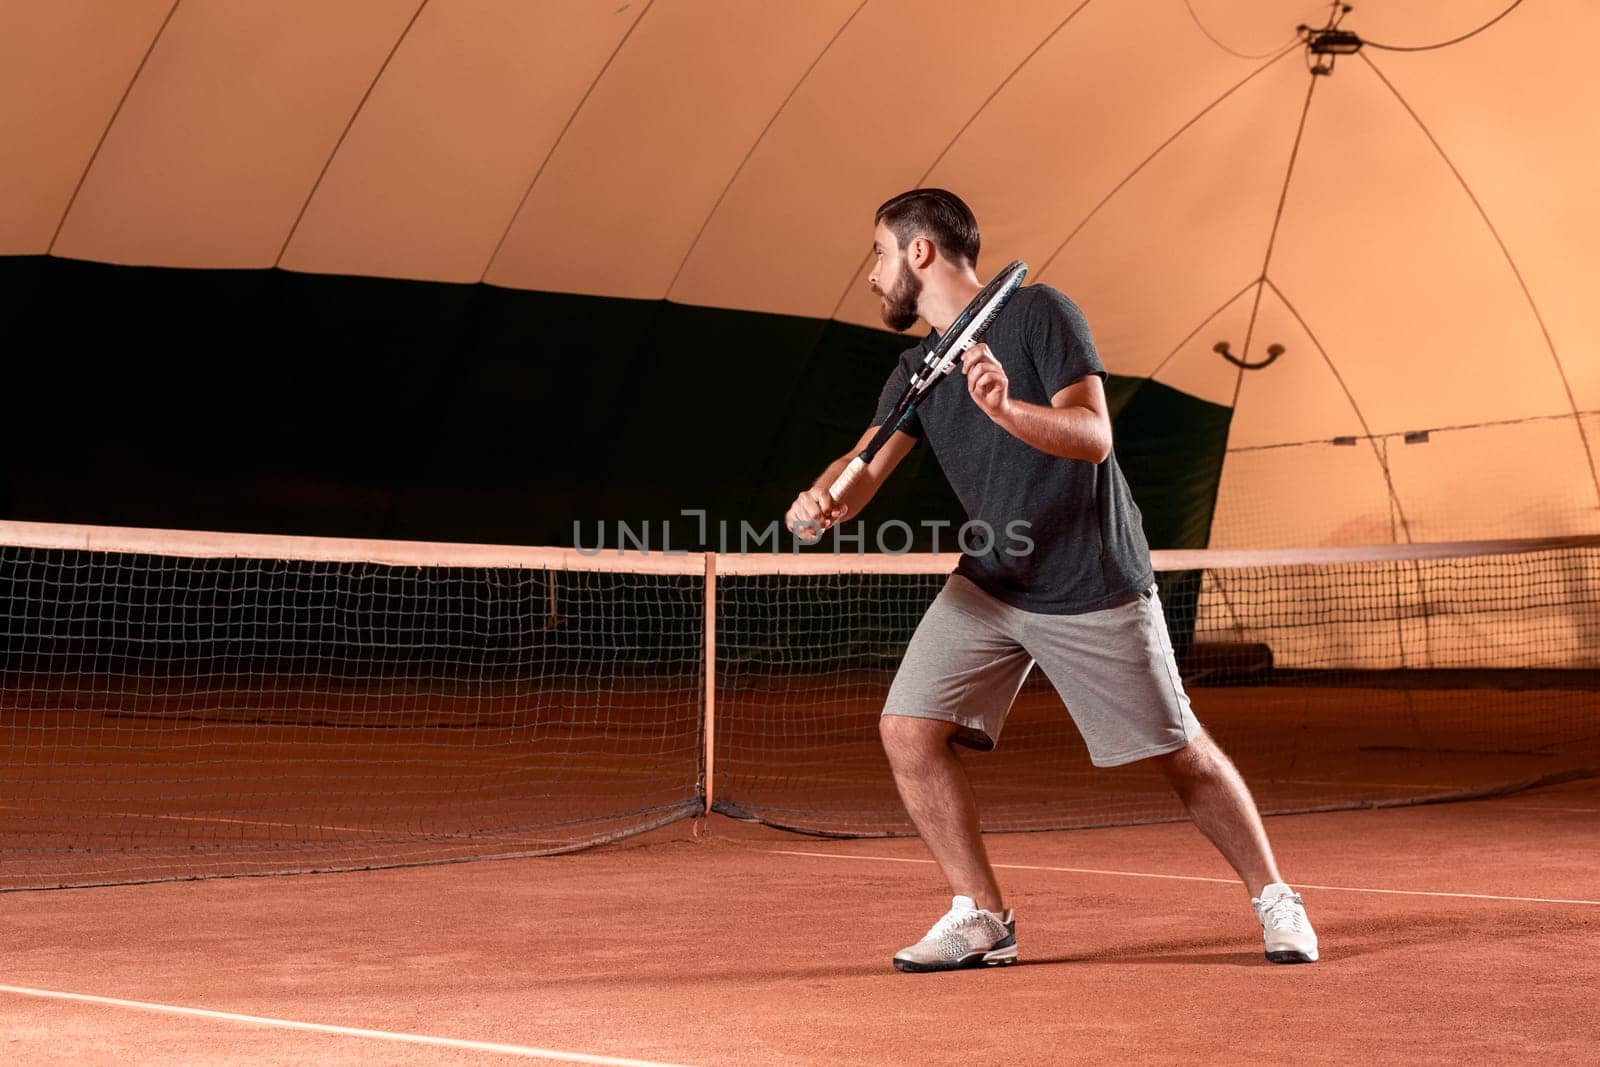 Handsome young man in t-shirt holding tennis racket and looking concentrated while standing on tennis court